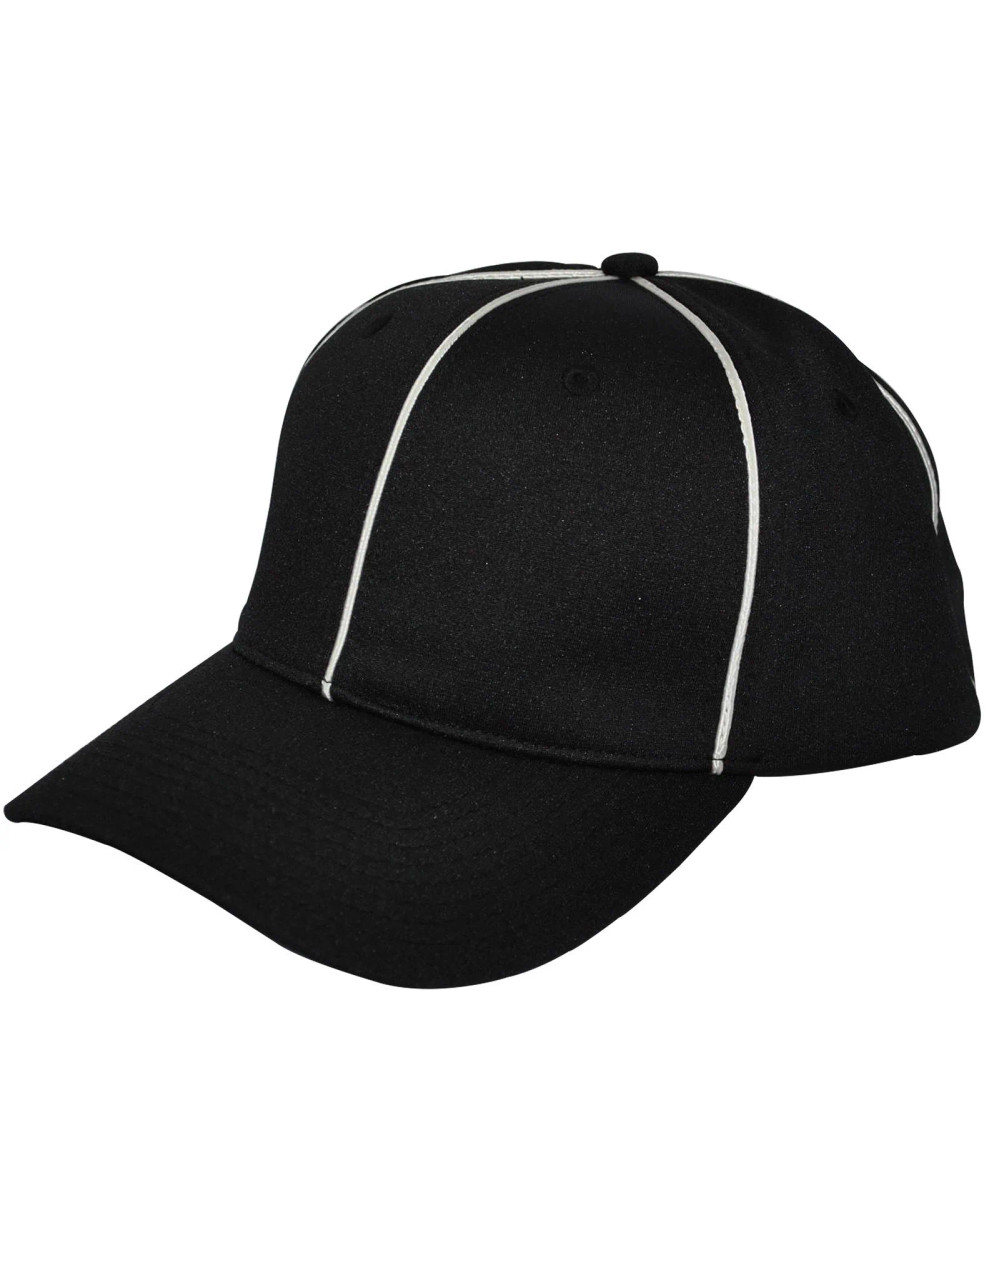 Smitty Black w/ White Piping Flex Fit Football Hat - Get Official Products | Flex Caps